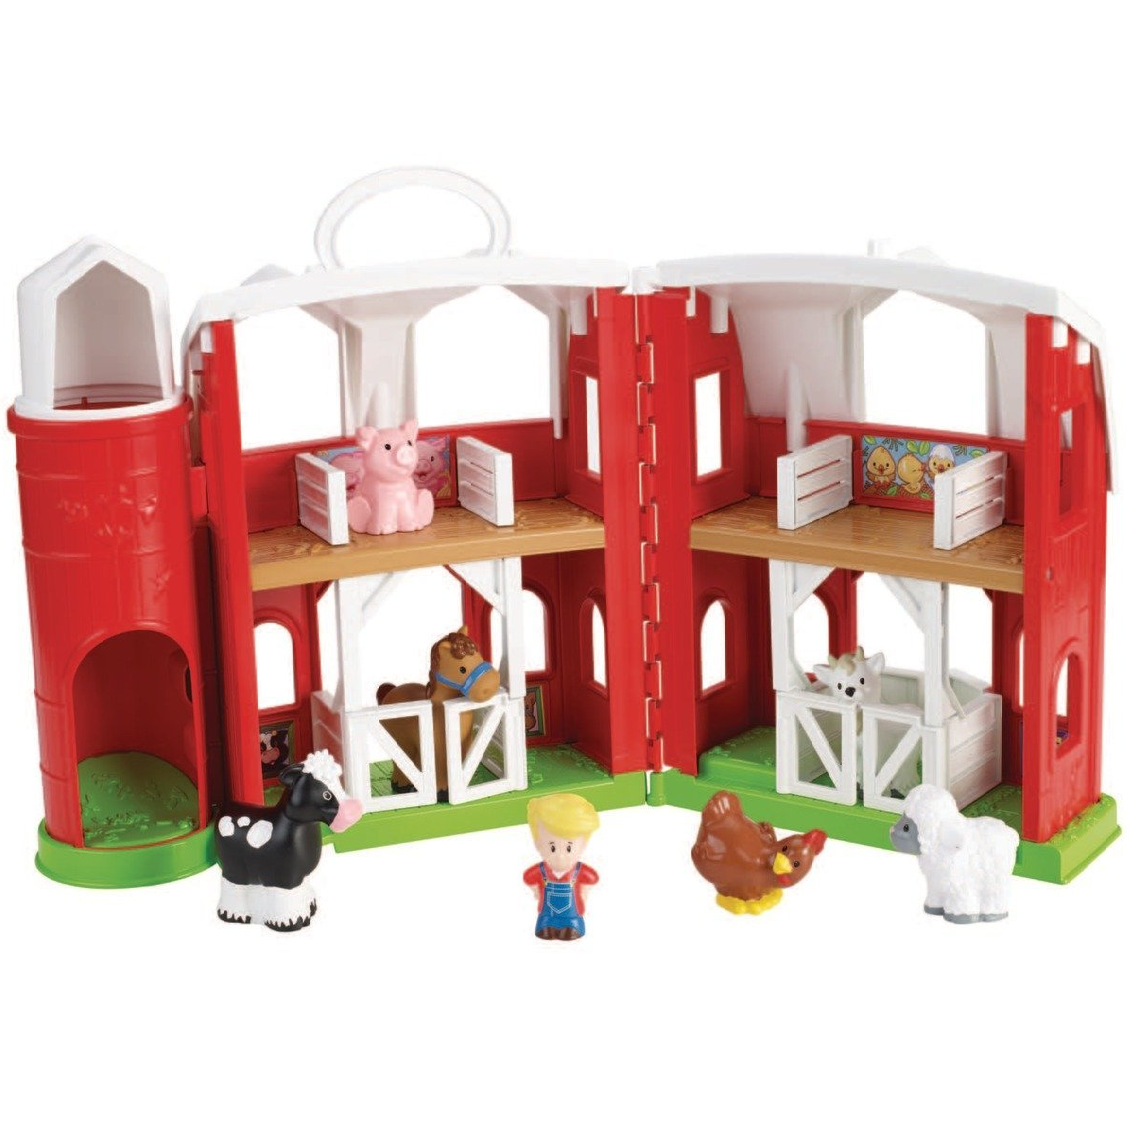 Amazon Prime Members: Fisher Price Little People Animal Friends Farm Only $22.39! (Reg. $39.99)